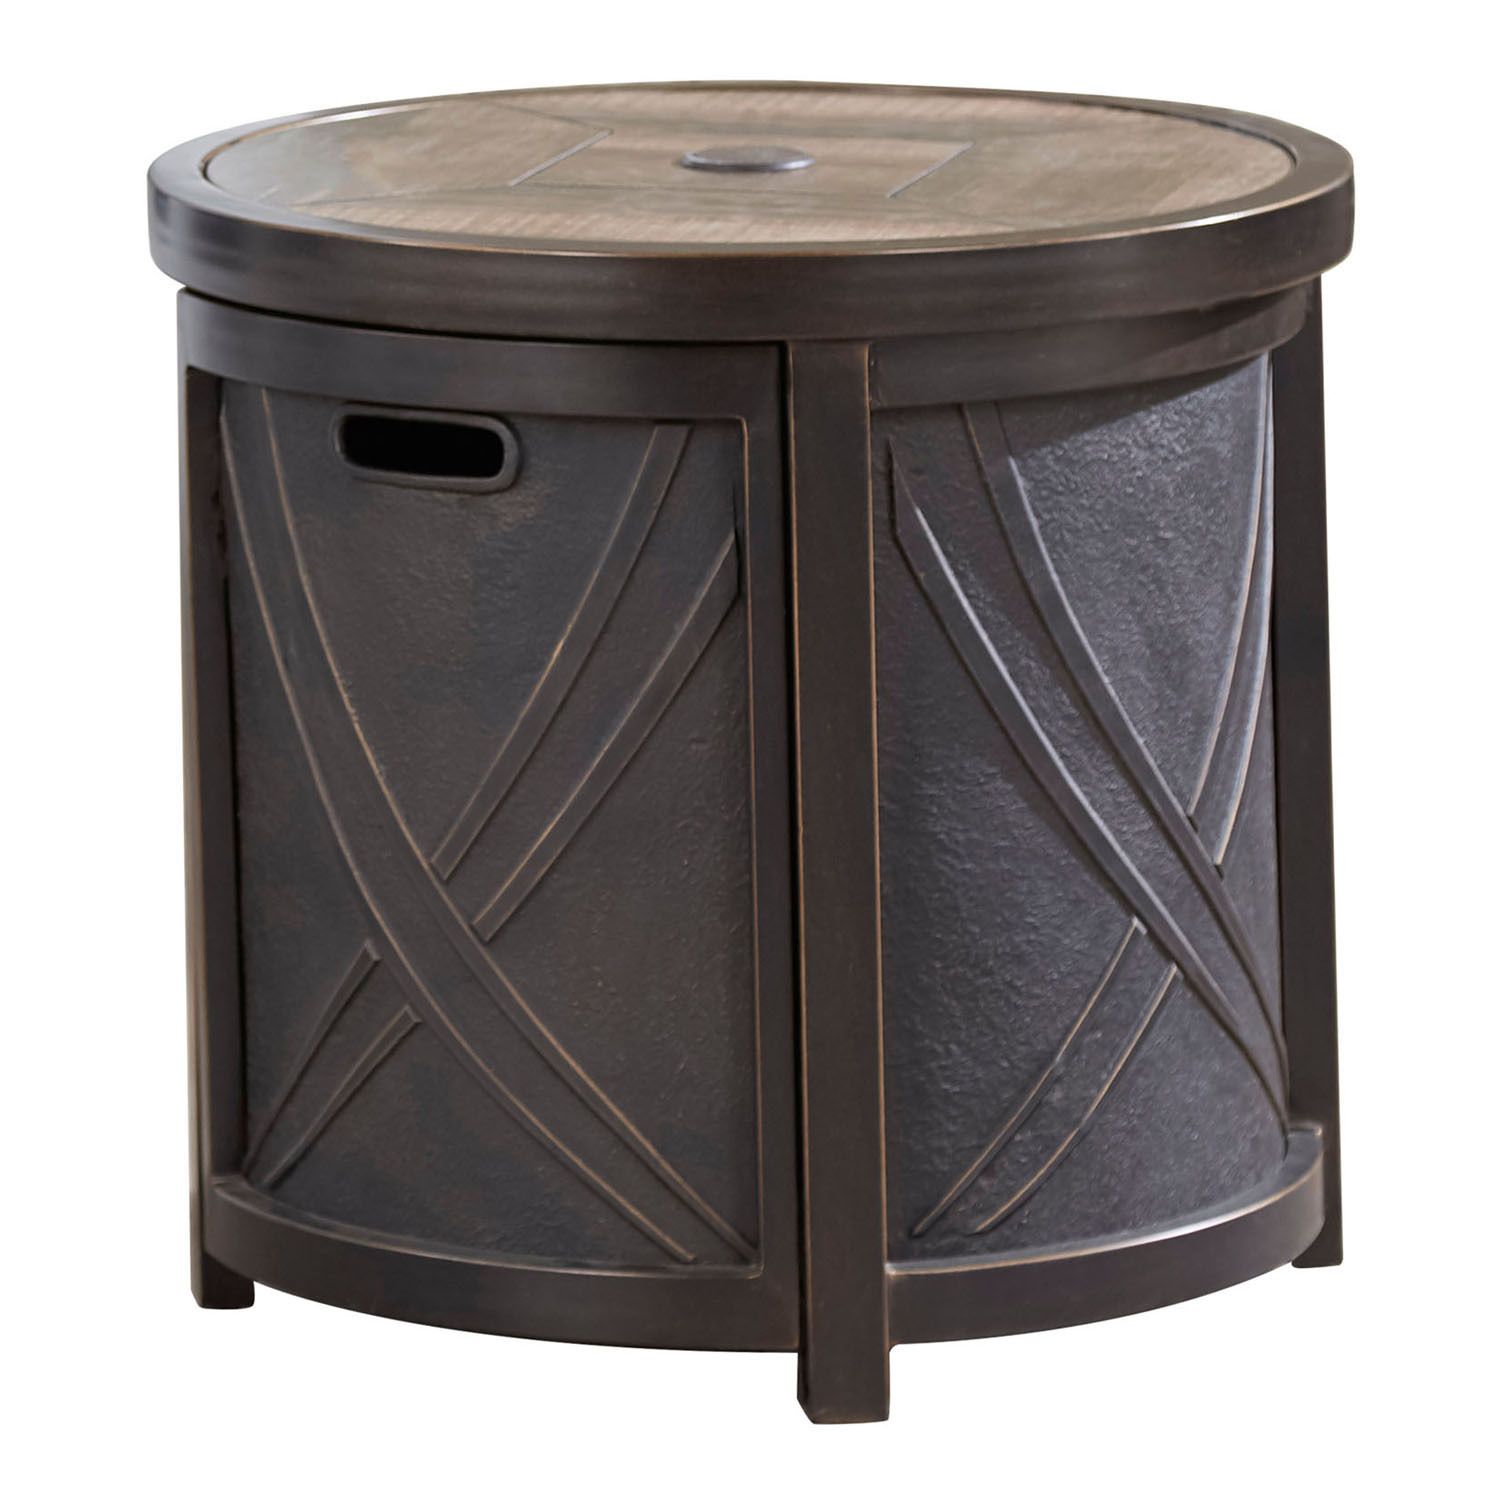 Image for Hanover Accessories Round Umbrella End Table at Kohl's.